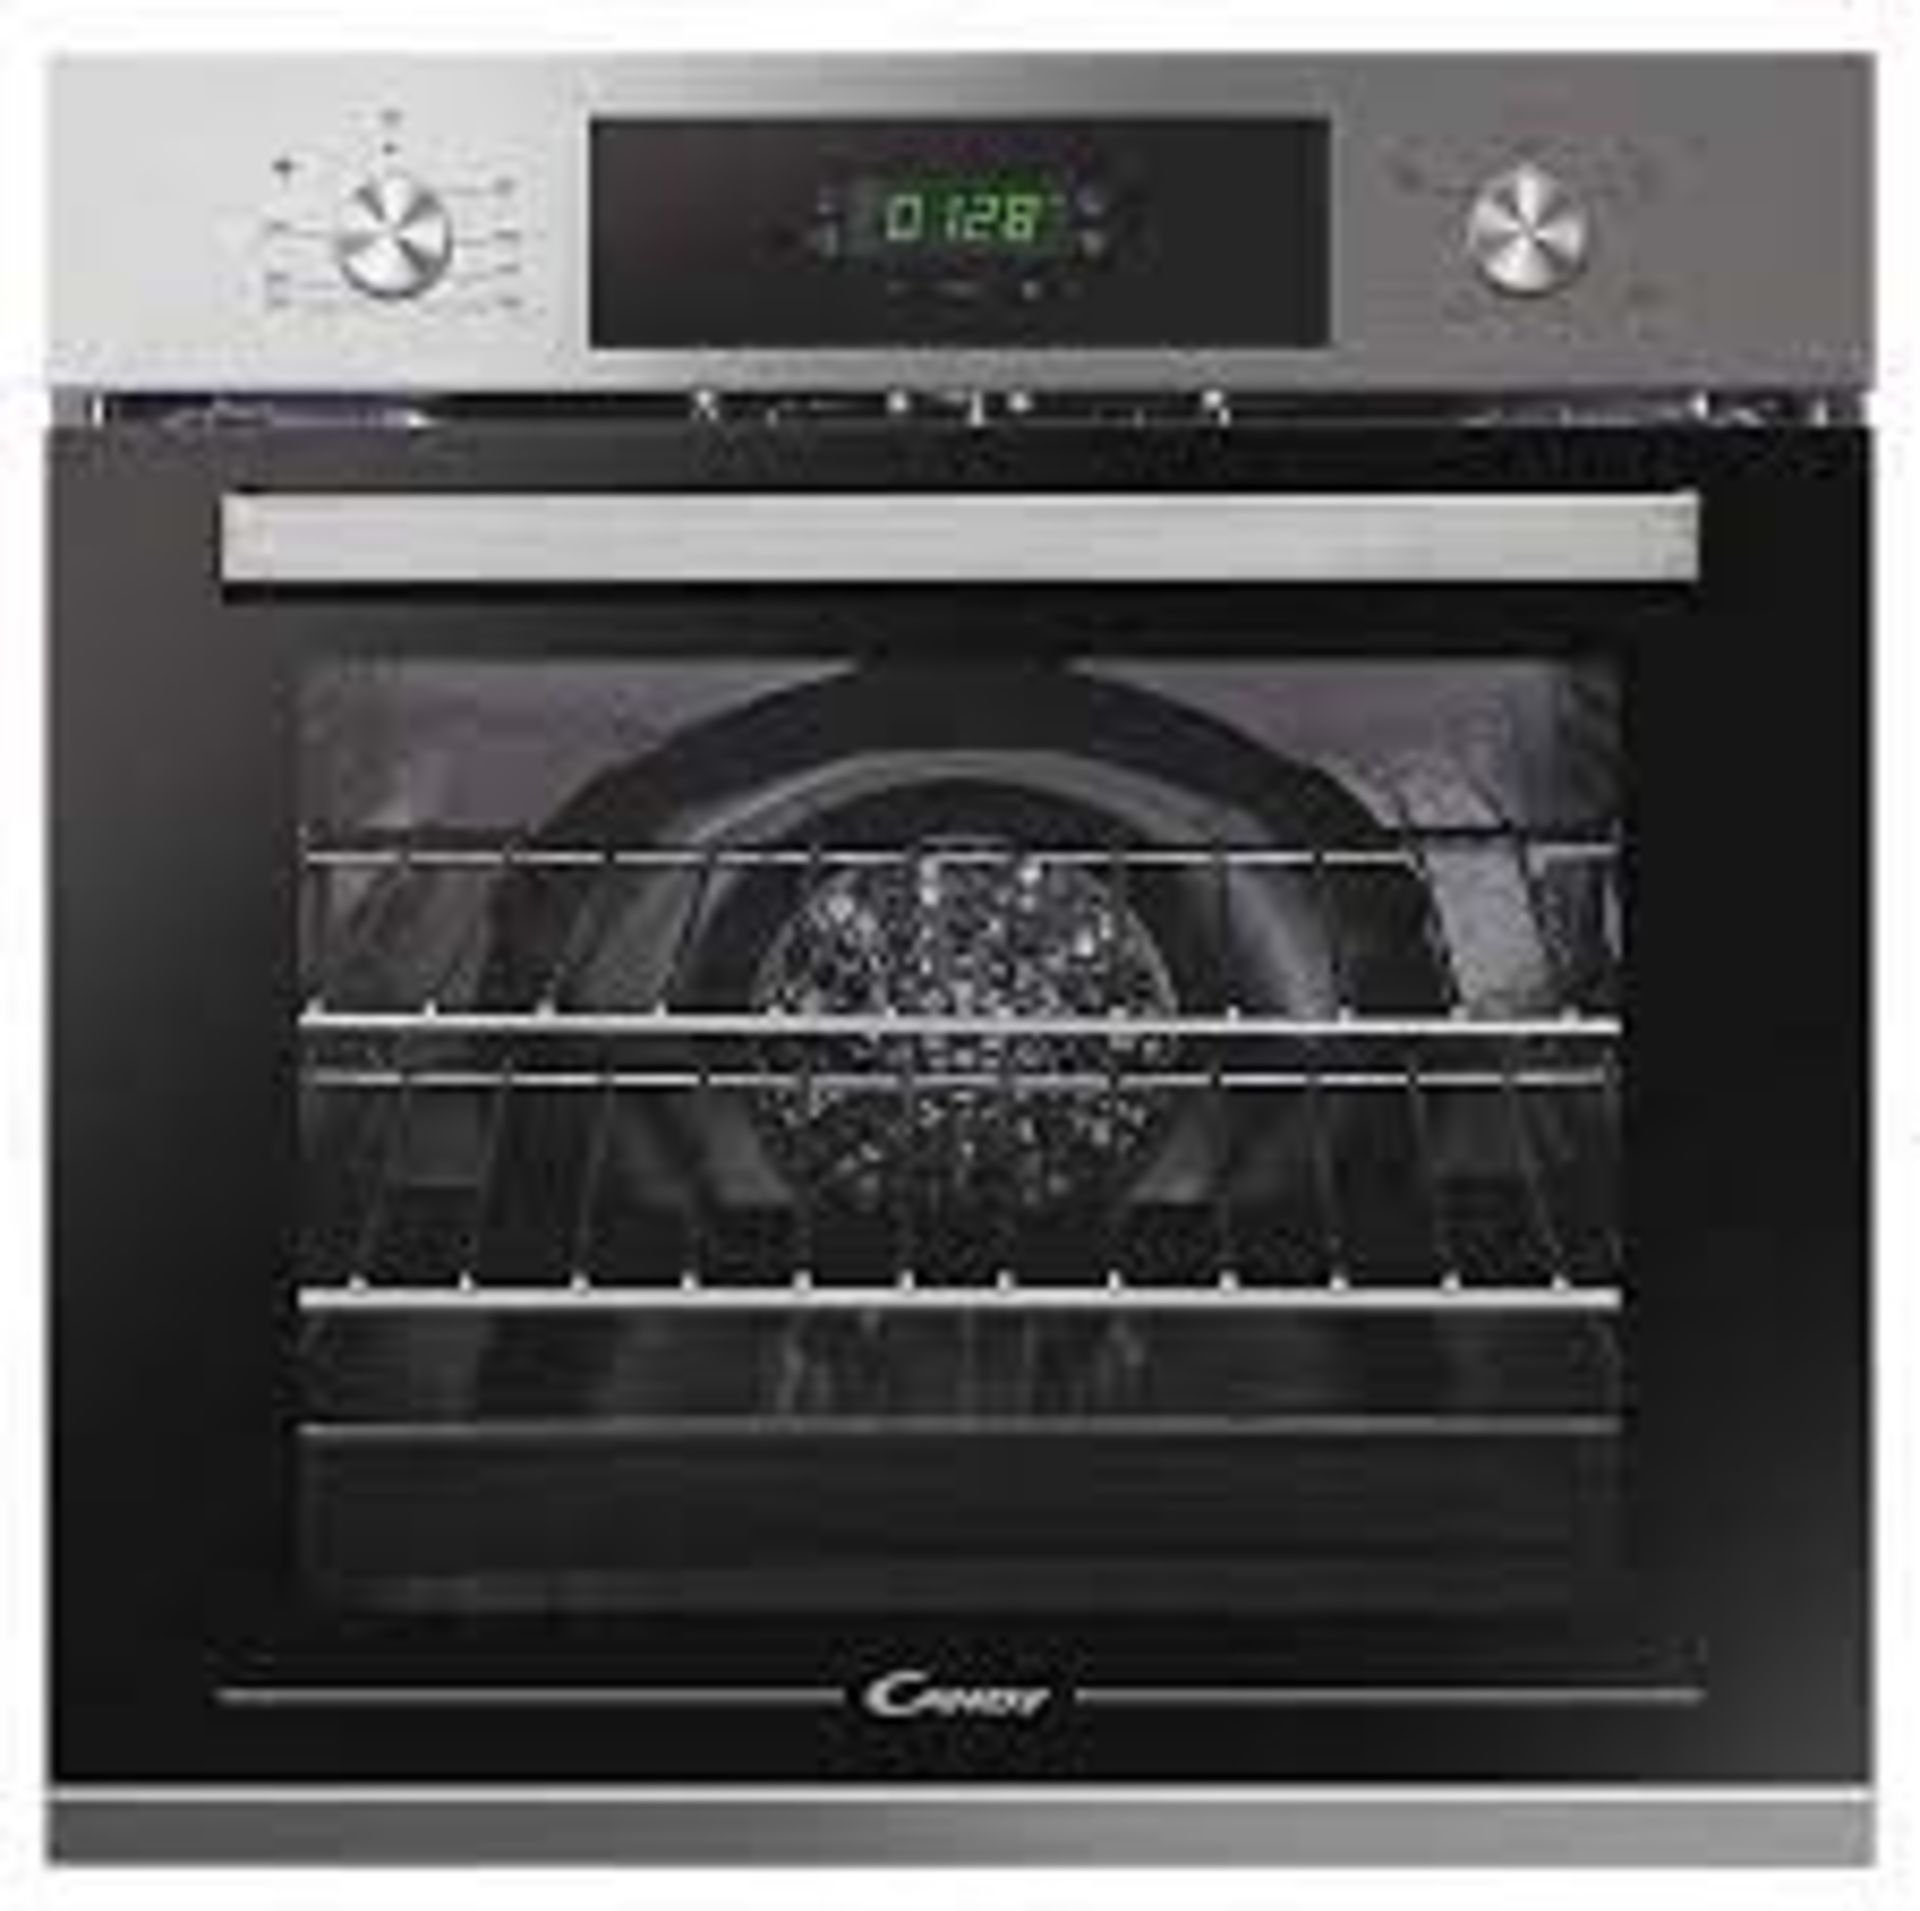 Candy FCT405X Single Electric Oven - Stainless Steel. - Er45. This Candy 60cm fan oven is ideal